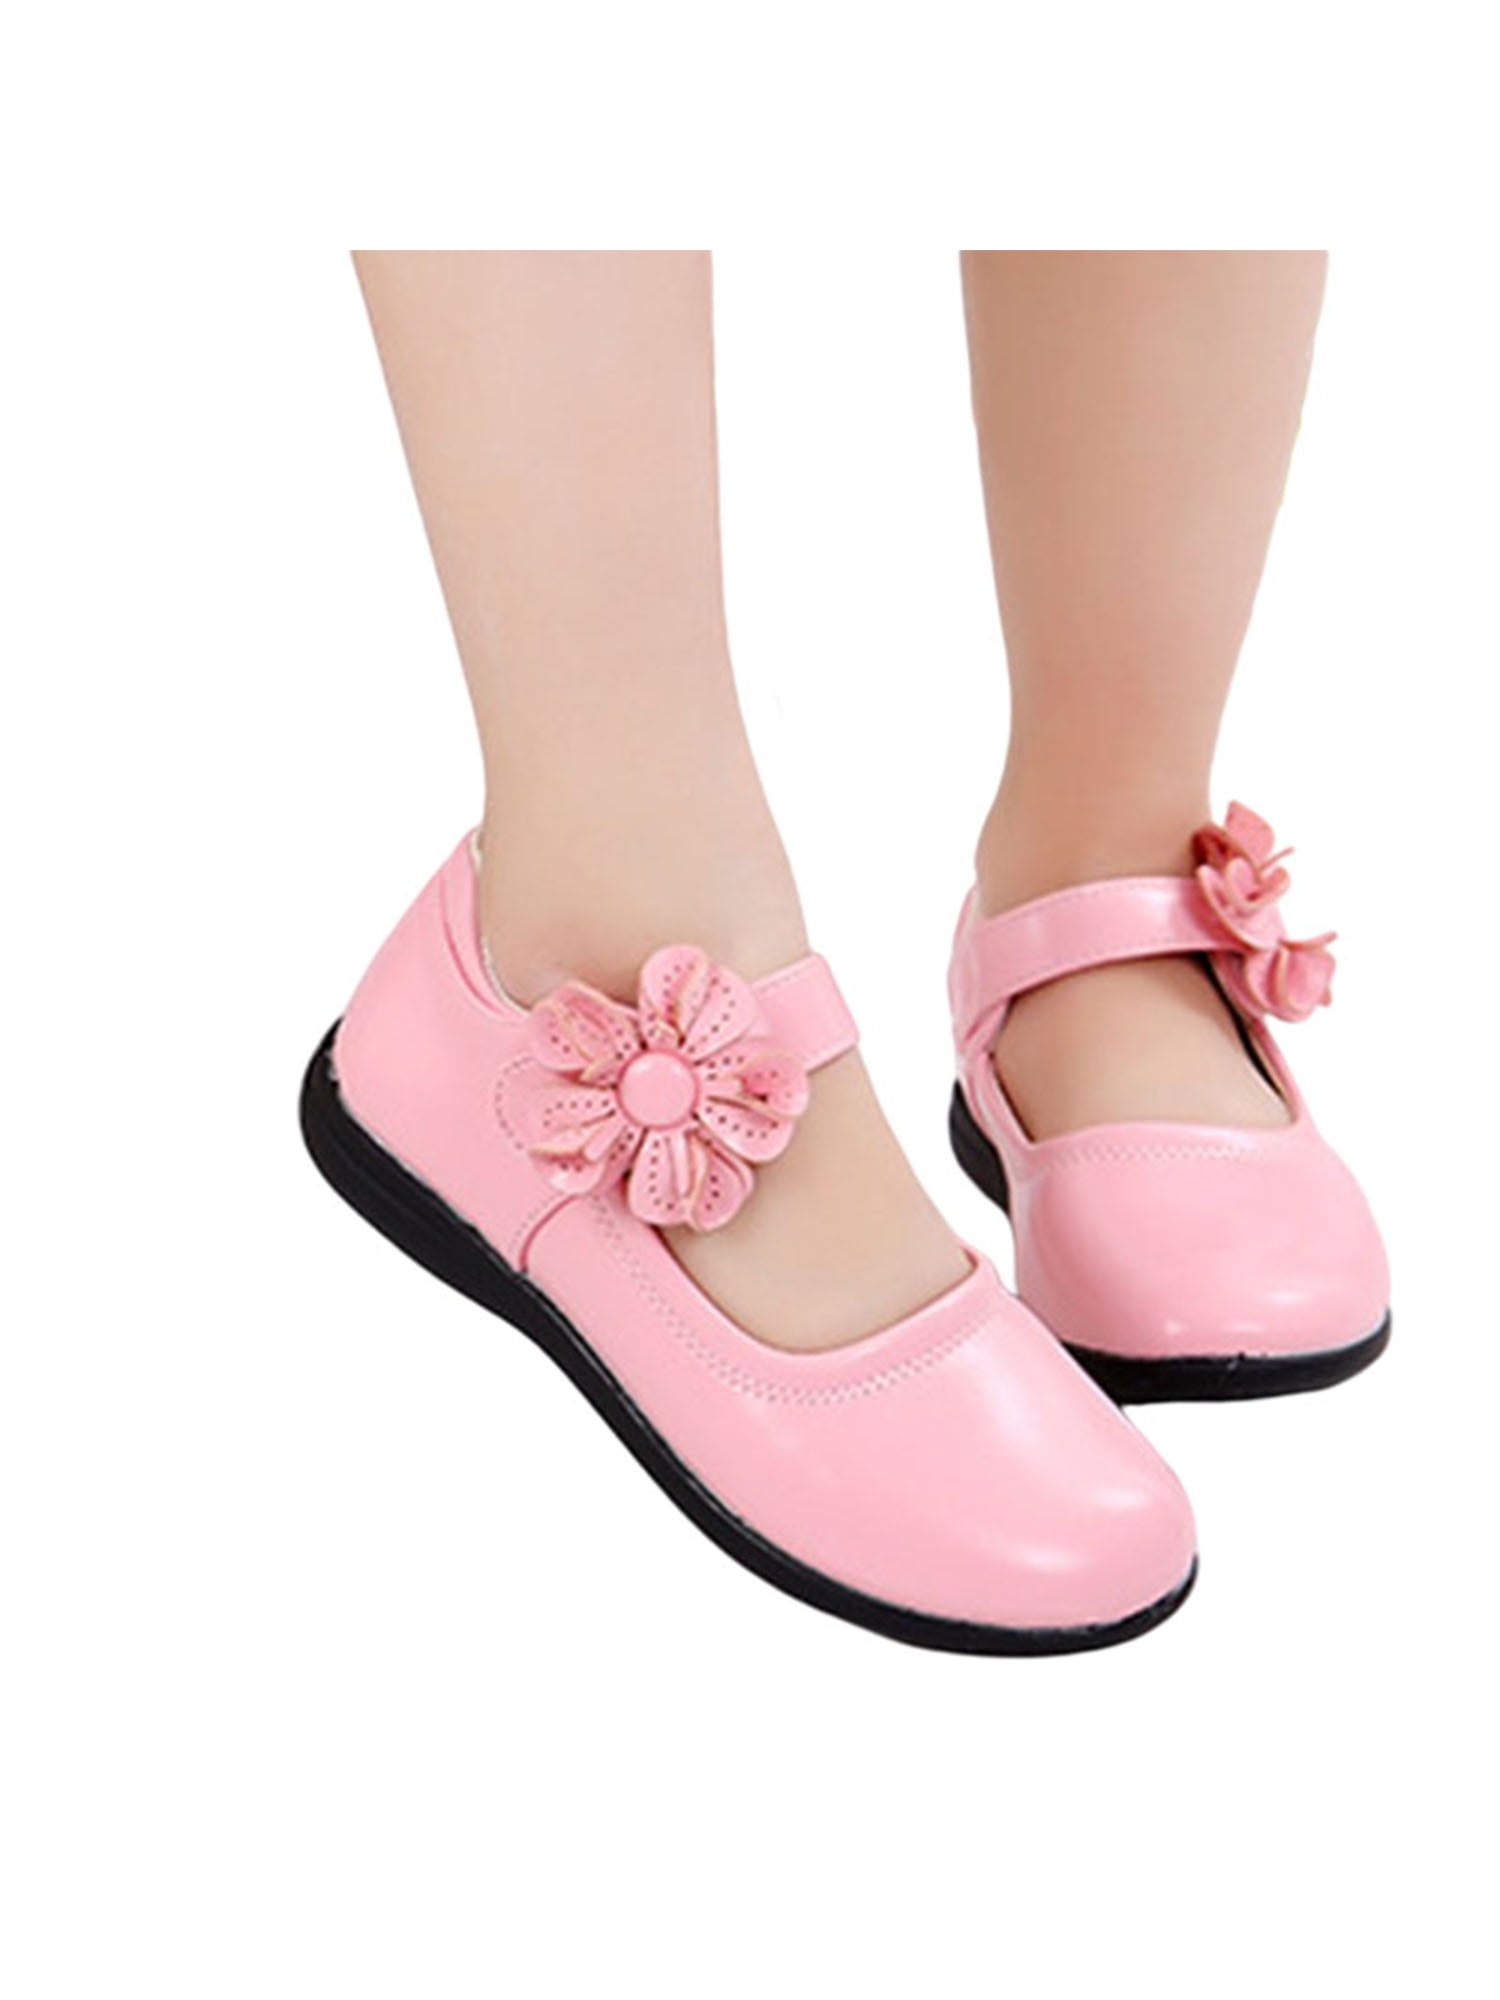 Baby Girls Dress Shoes Slip on Ballerina Flats Bows Shallow Mouth peas Shoes Dance Shoes Little Kid/Big Kid 